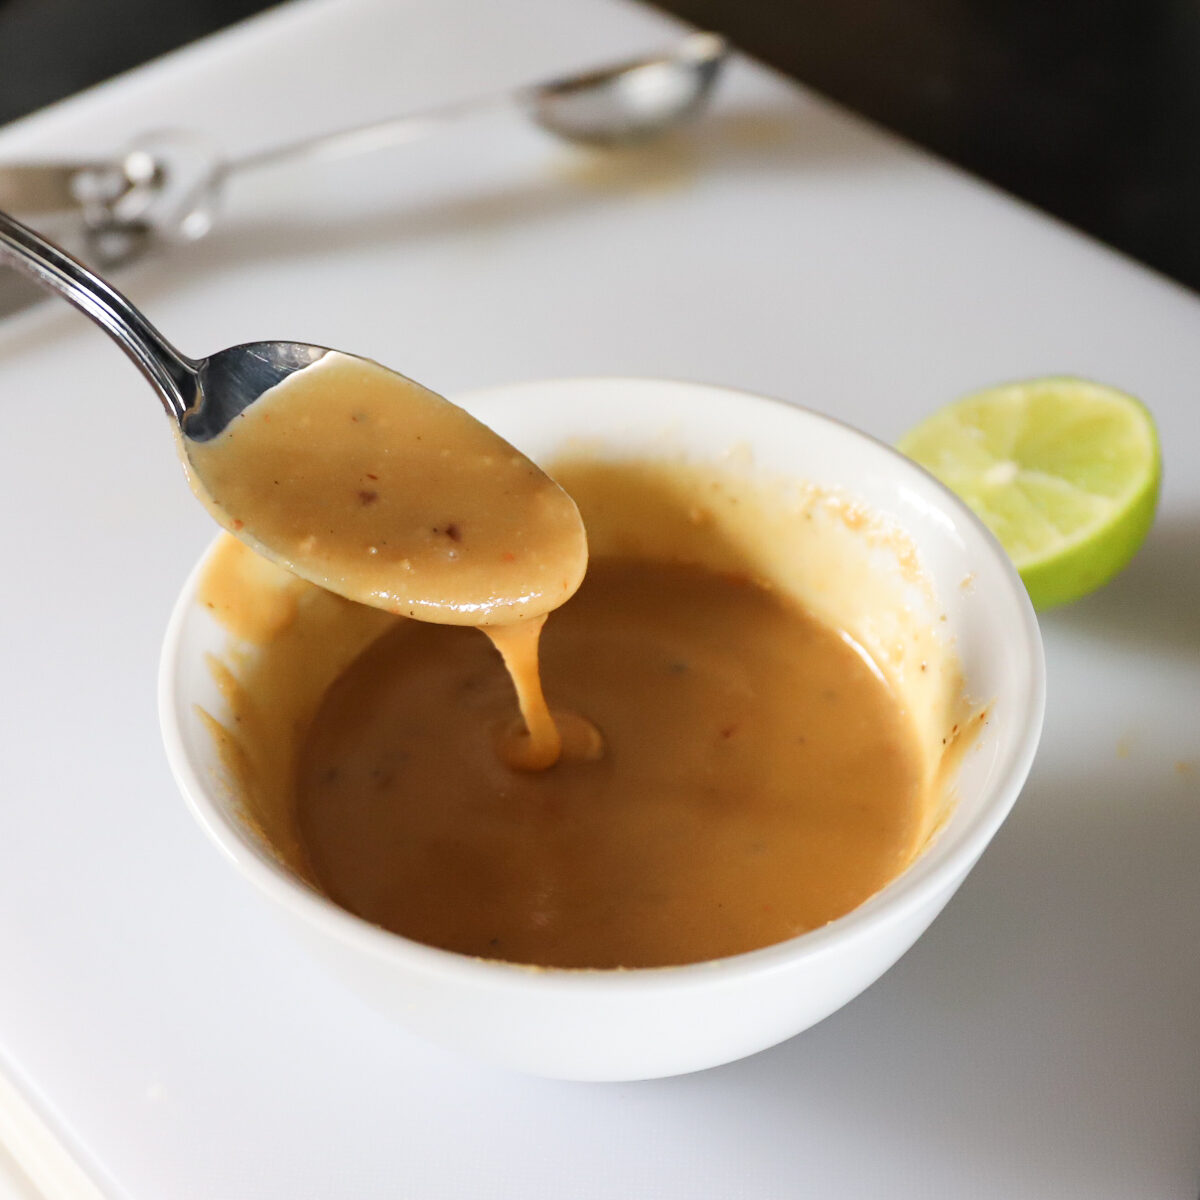 The brown tahini maple dressing in finished in the white bowl. A spoon has a scoop dripping out to show the creamy runny texture.